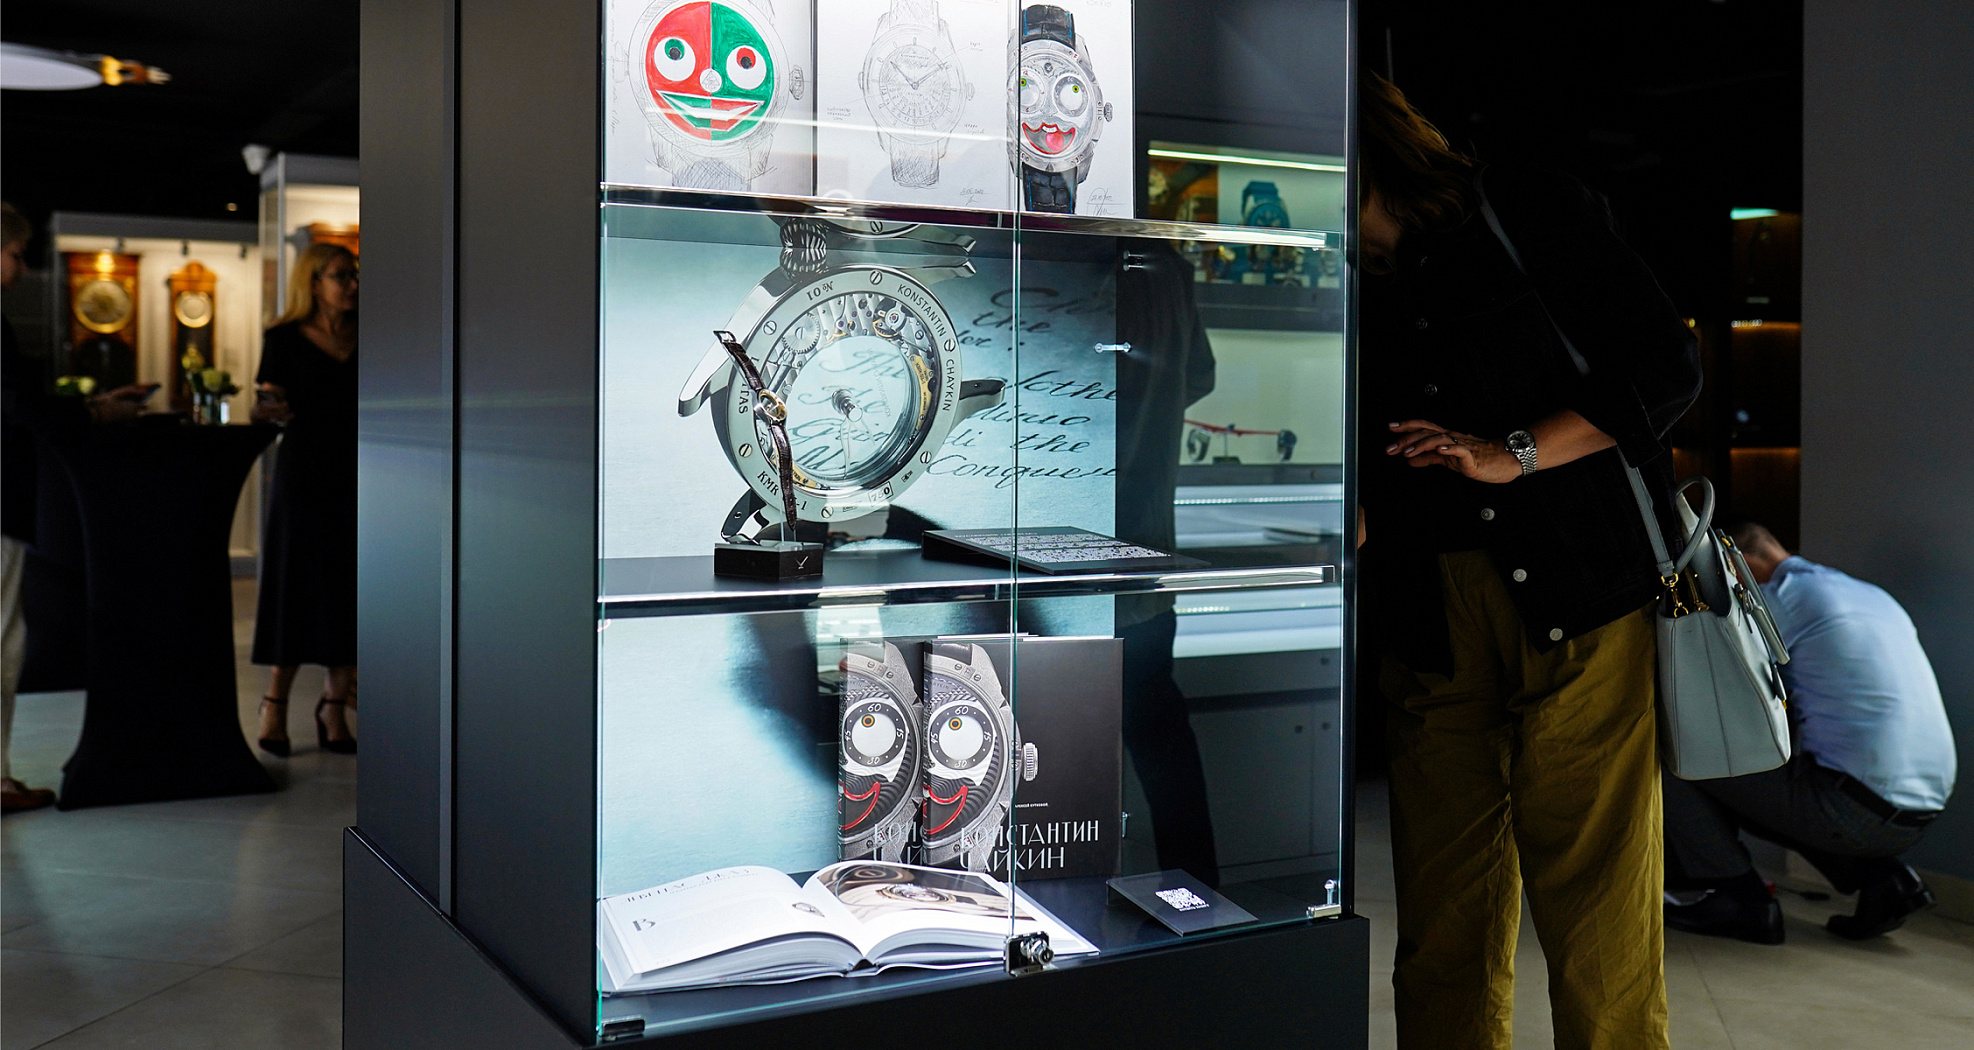 The Time and Watch Museum has opened its new exposition